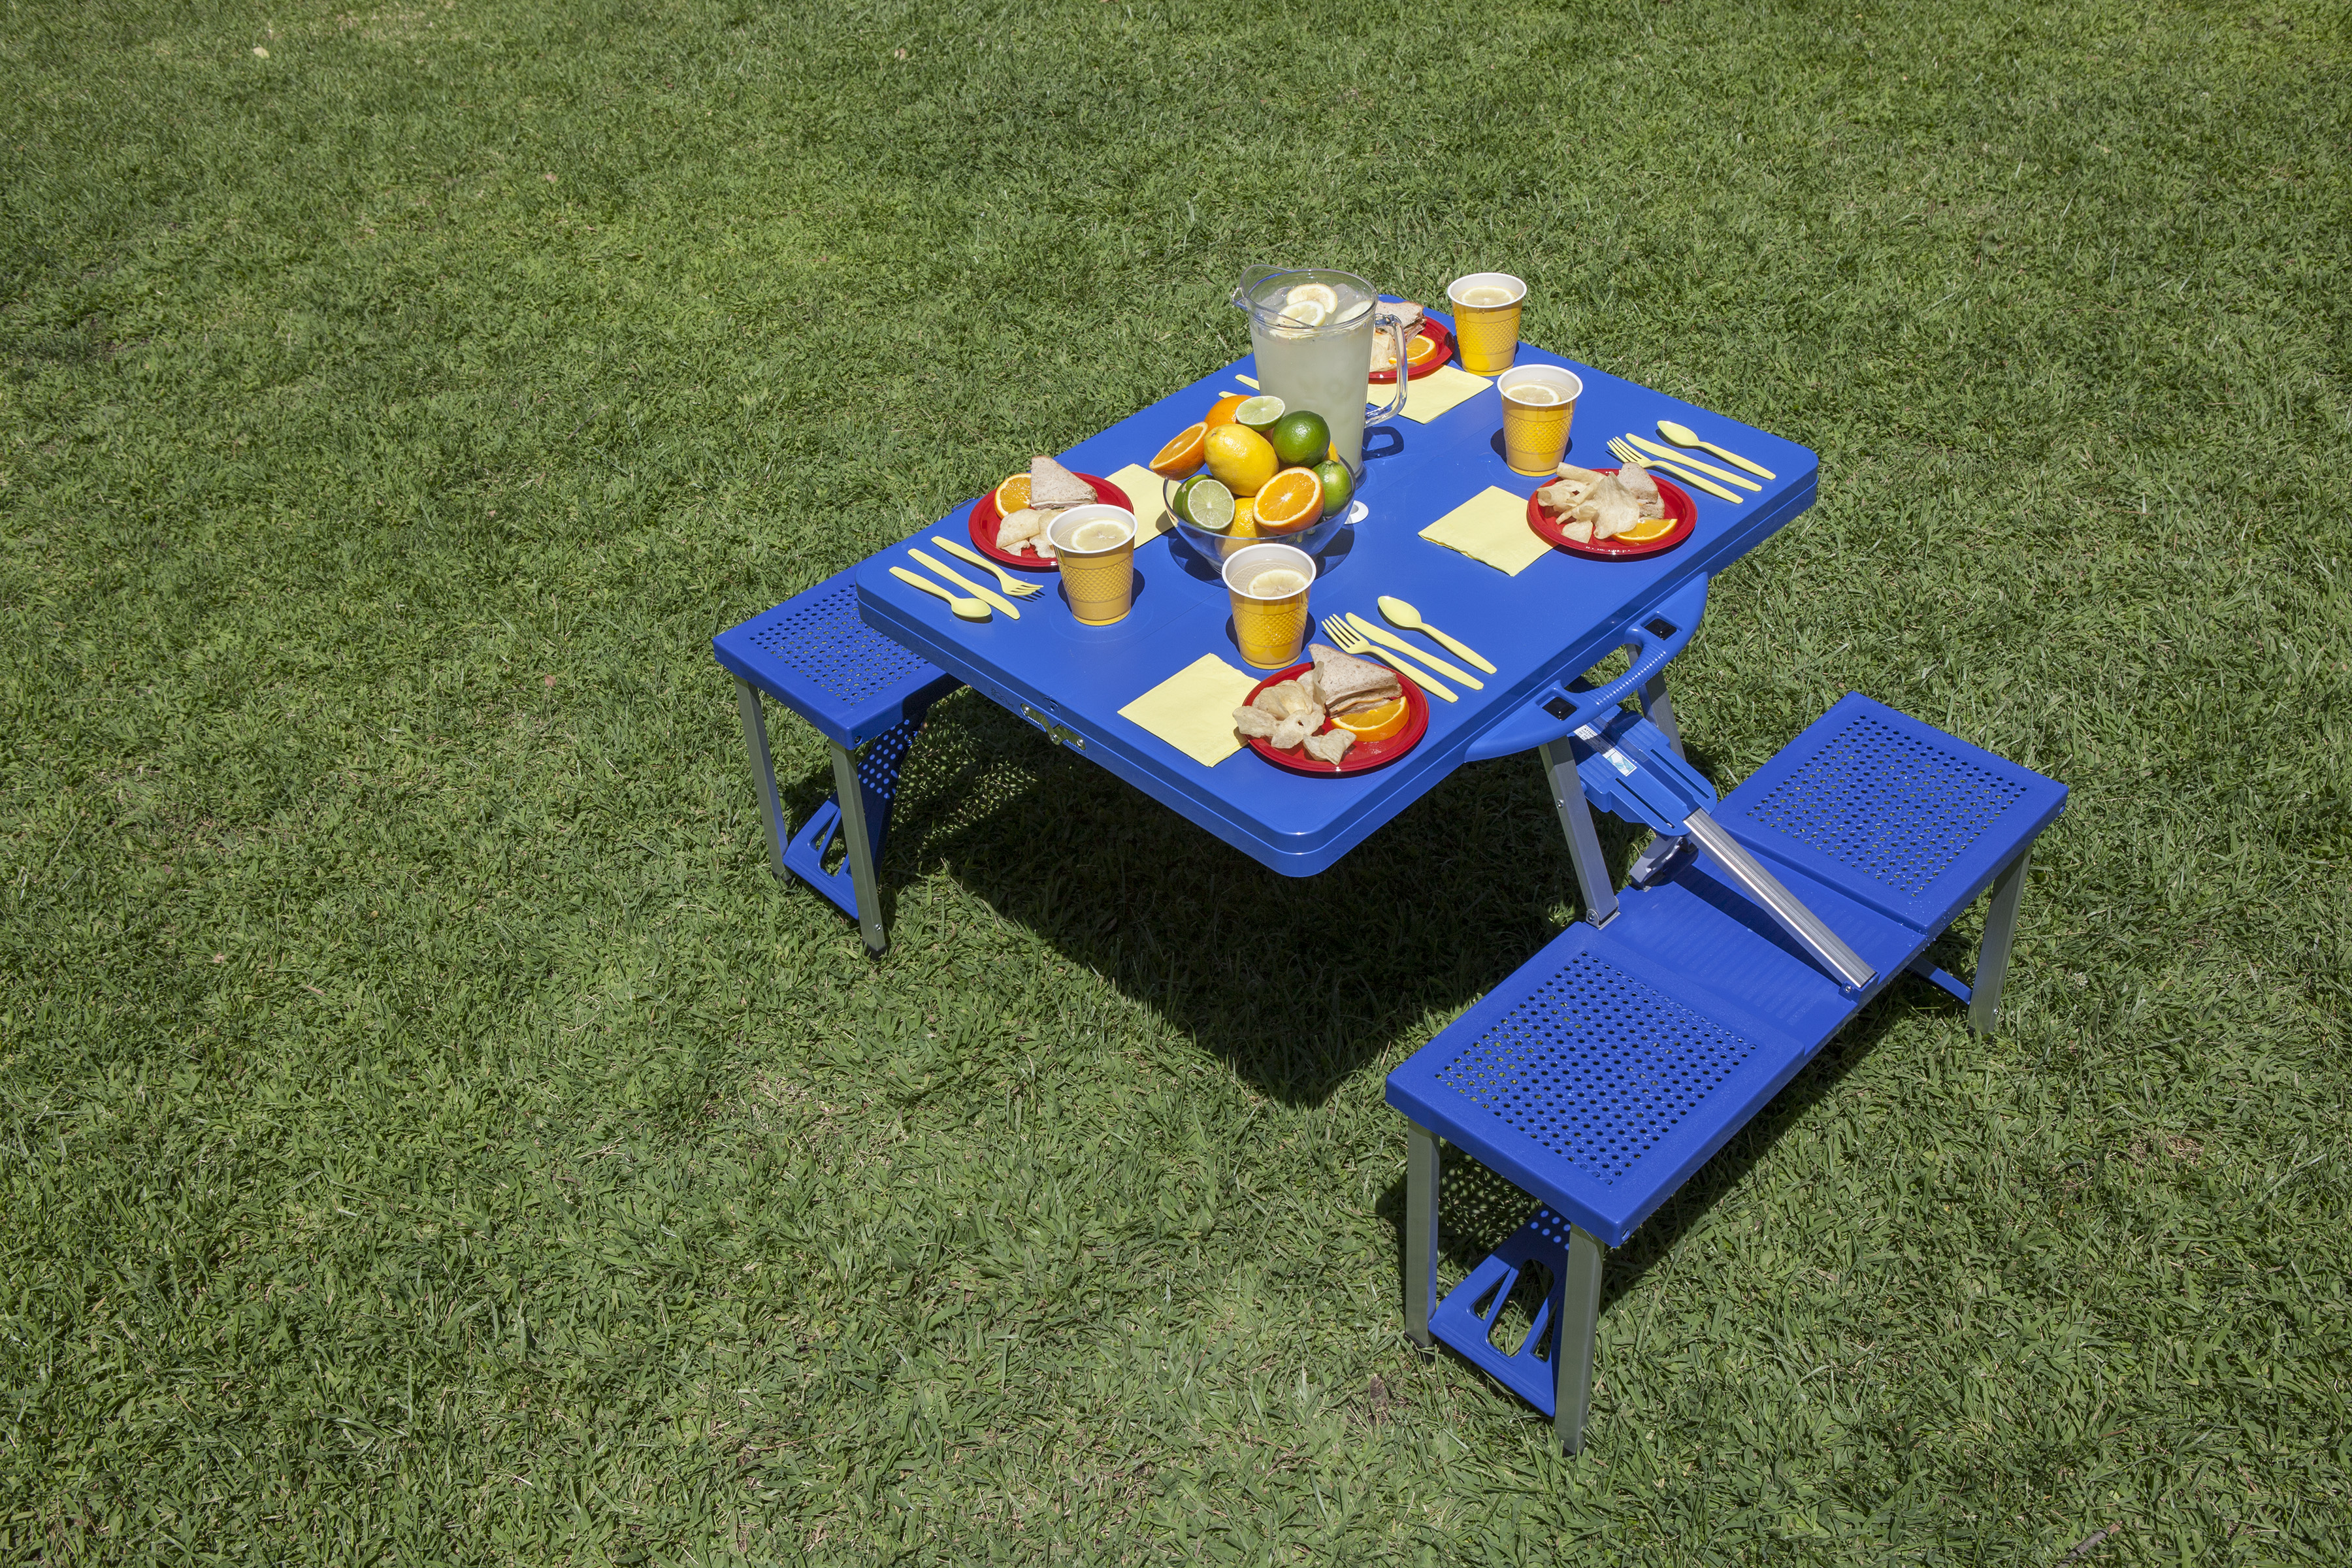 Cal Bears Football Field - Picnic Table Portable Folding Table with Seats